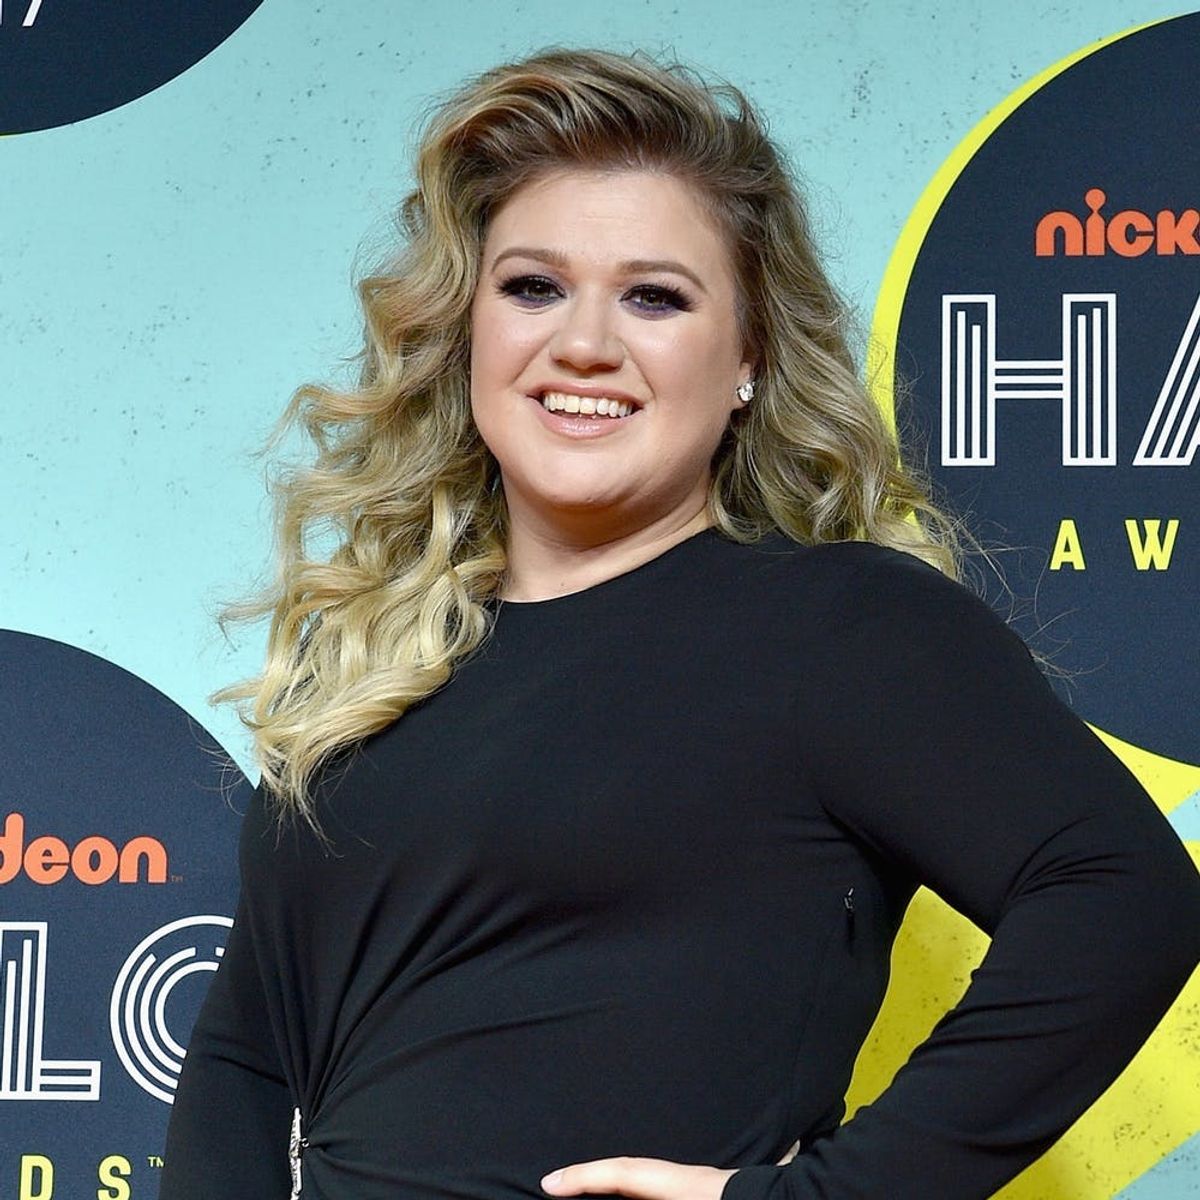 Kelly Clarkson Is Fangirling Over Performing With Pink at the AMAs